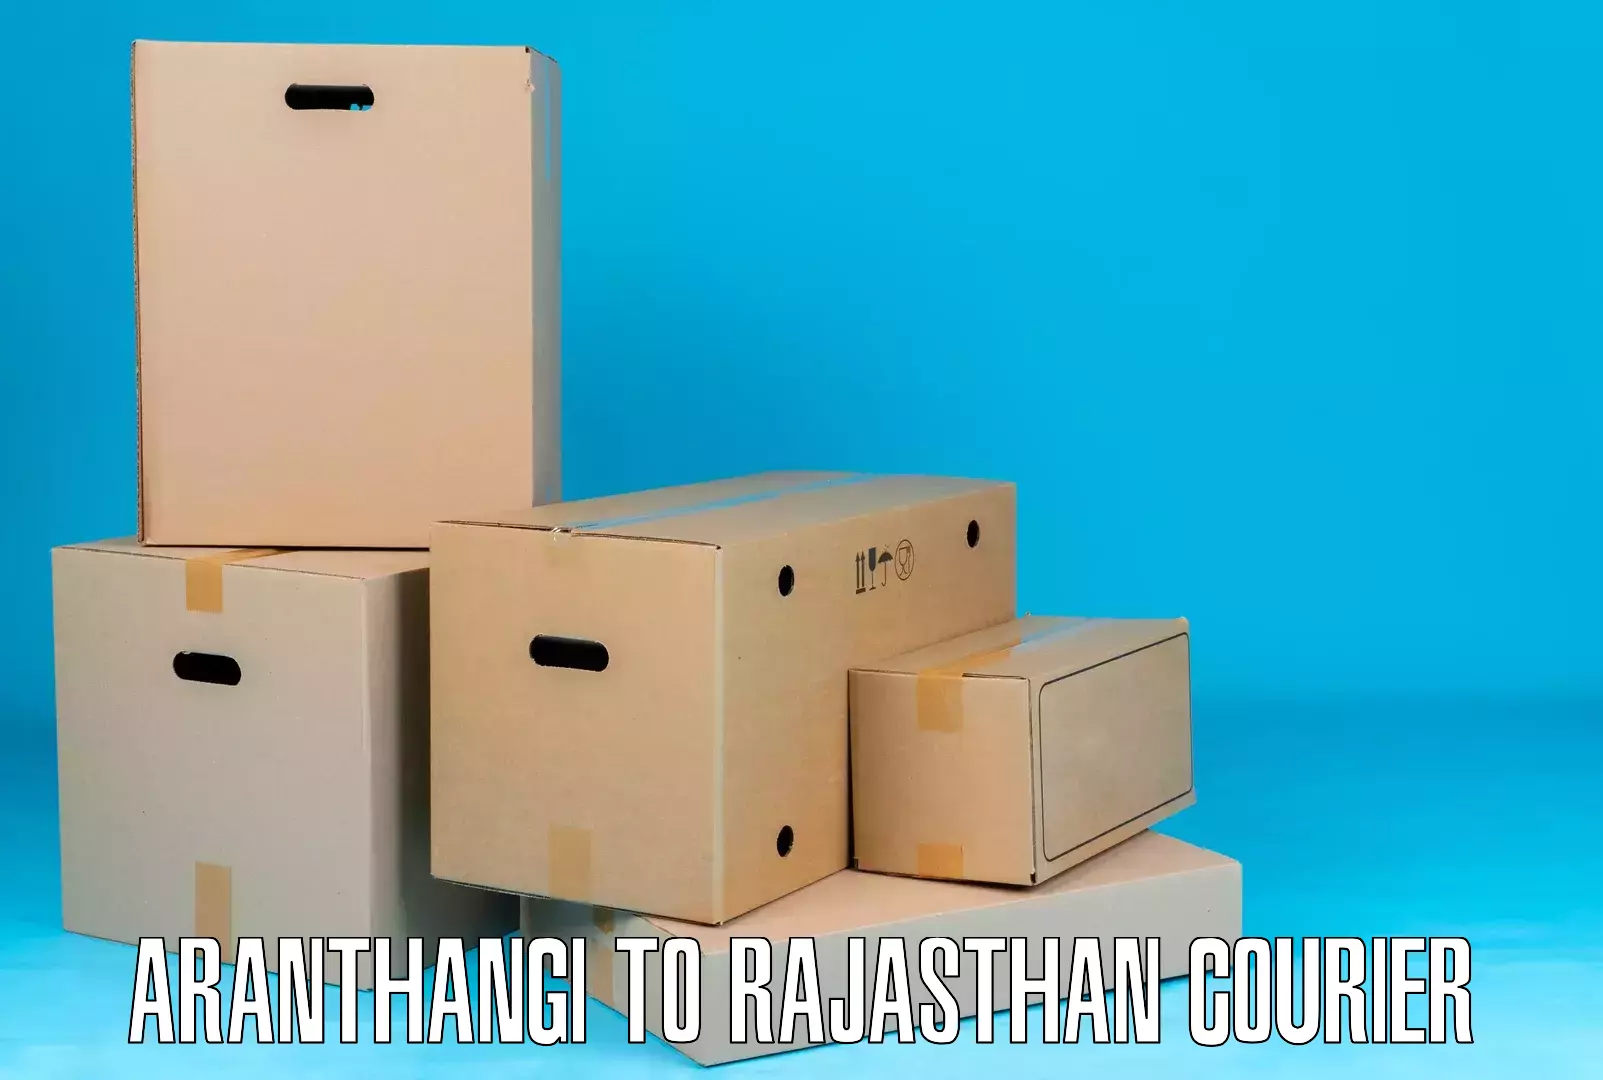 Comprehensive shipping network Aranthangi to Dholpur